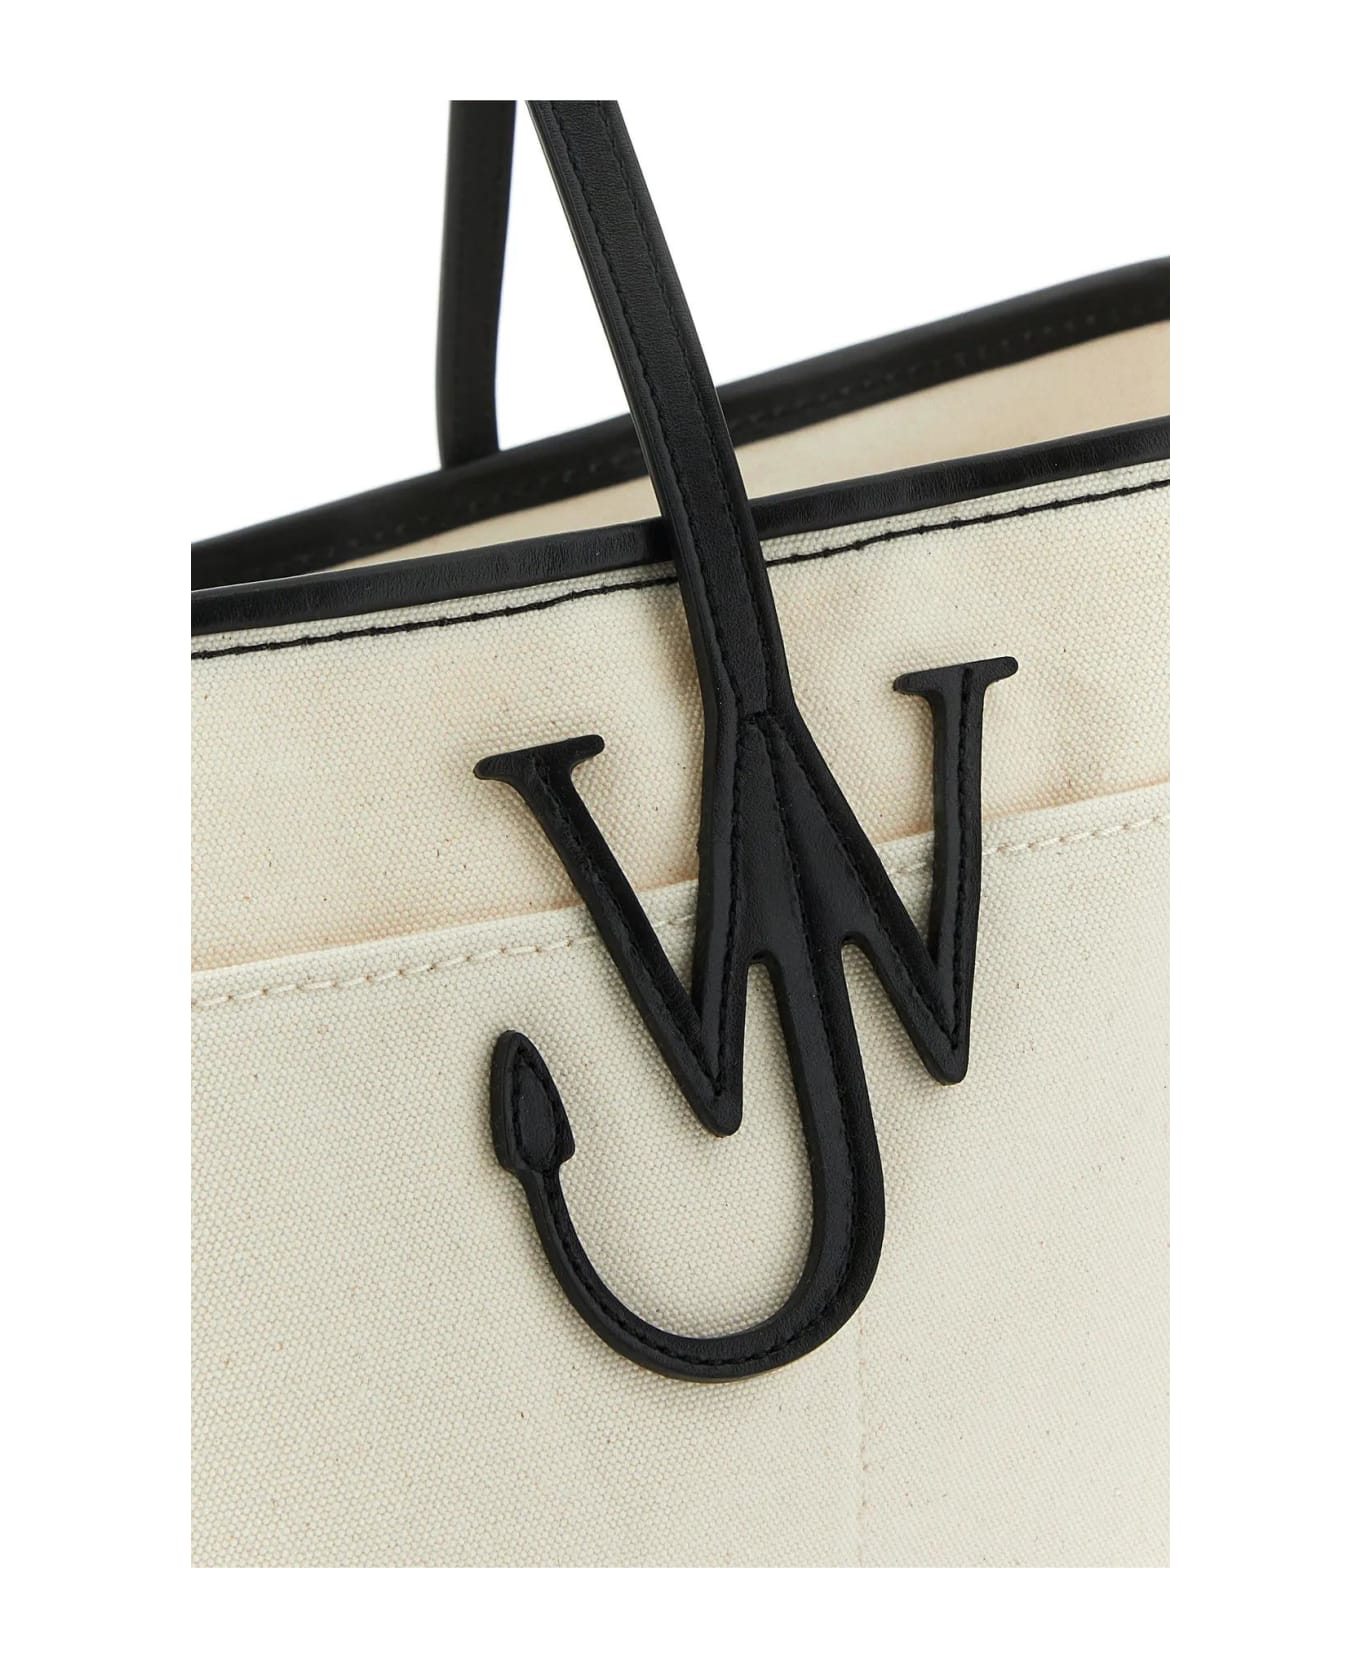 J.W. Anderson Ivory Canvas Anchor Shopping Bag - WHITE/BLACK